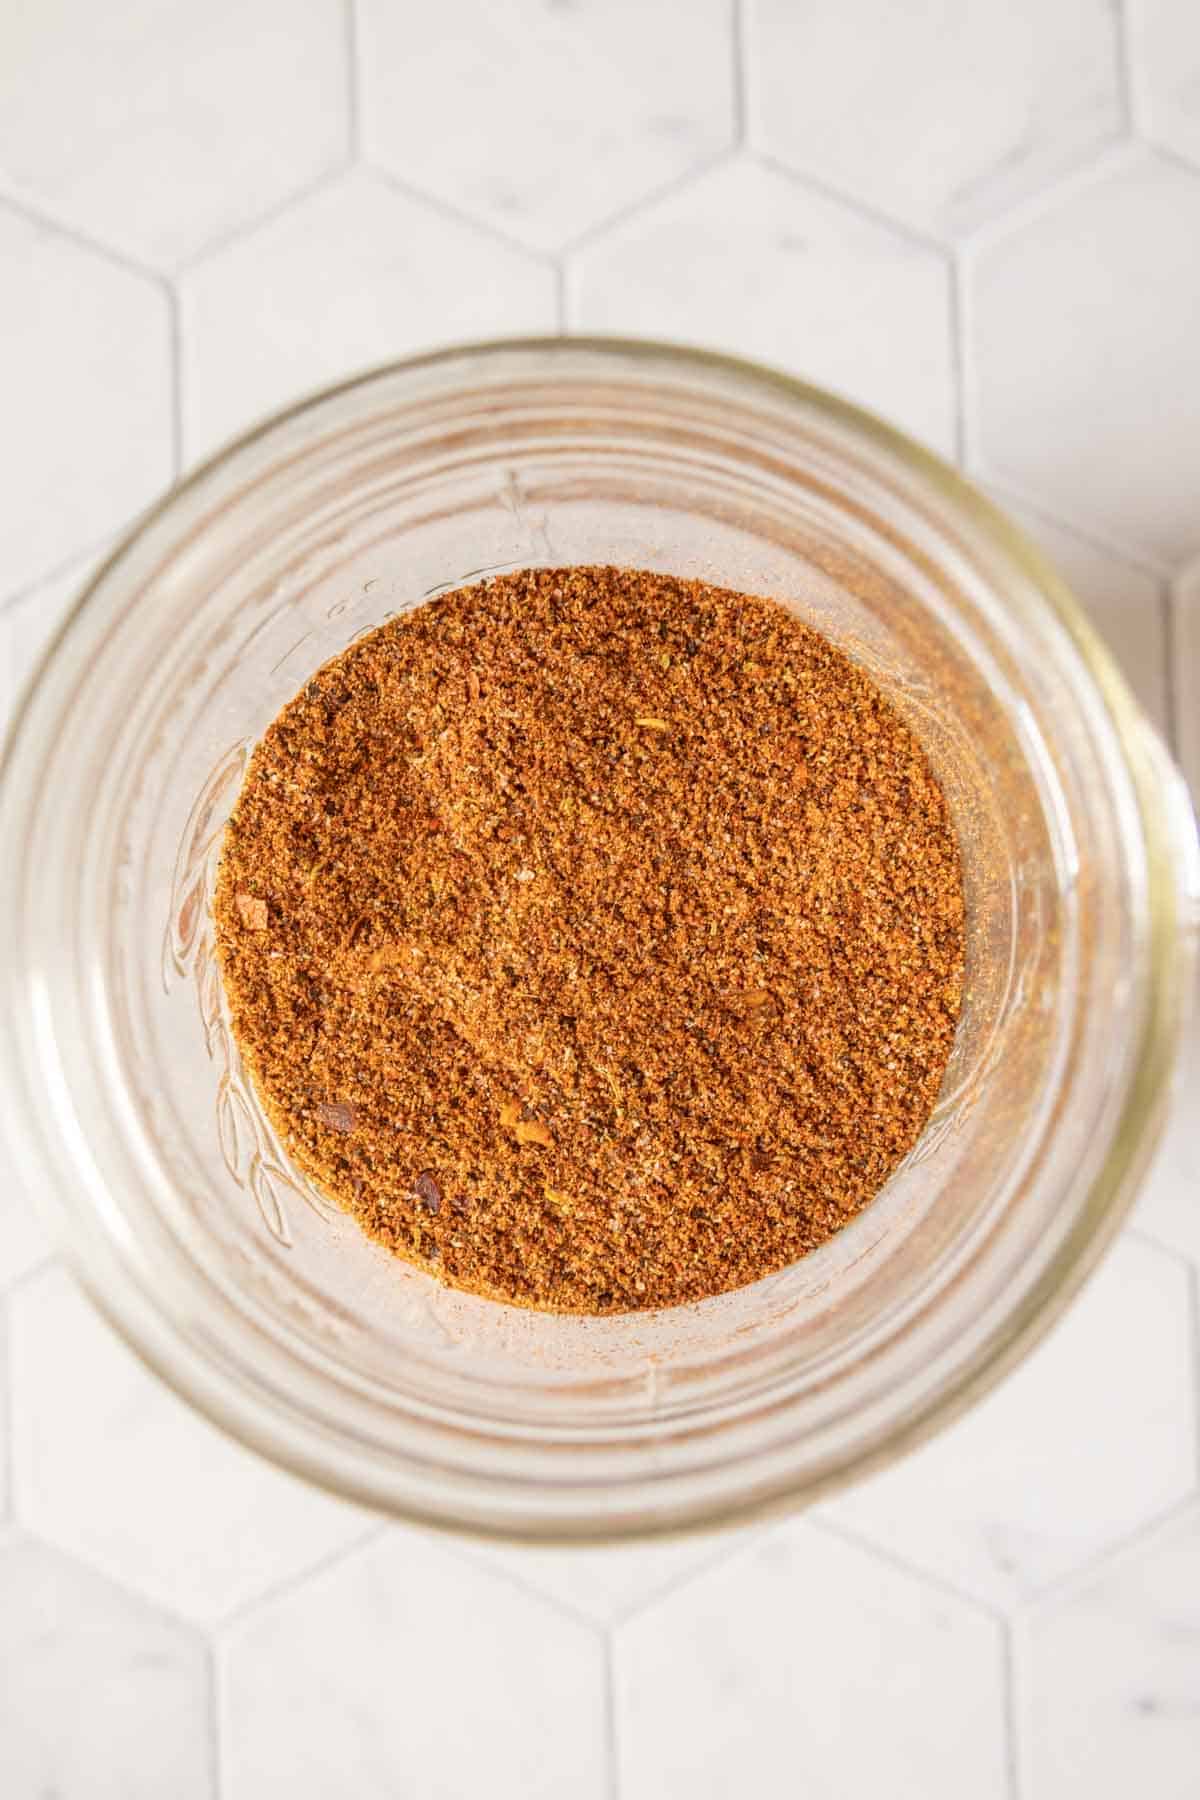 Homemade taco seasoning mix in a jar from overhead.